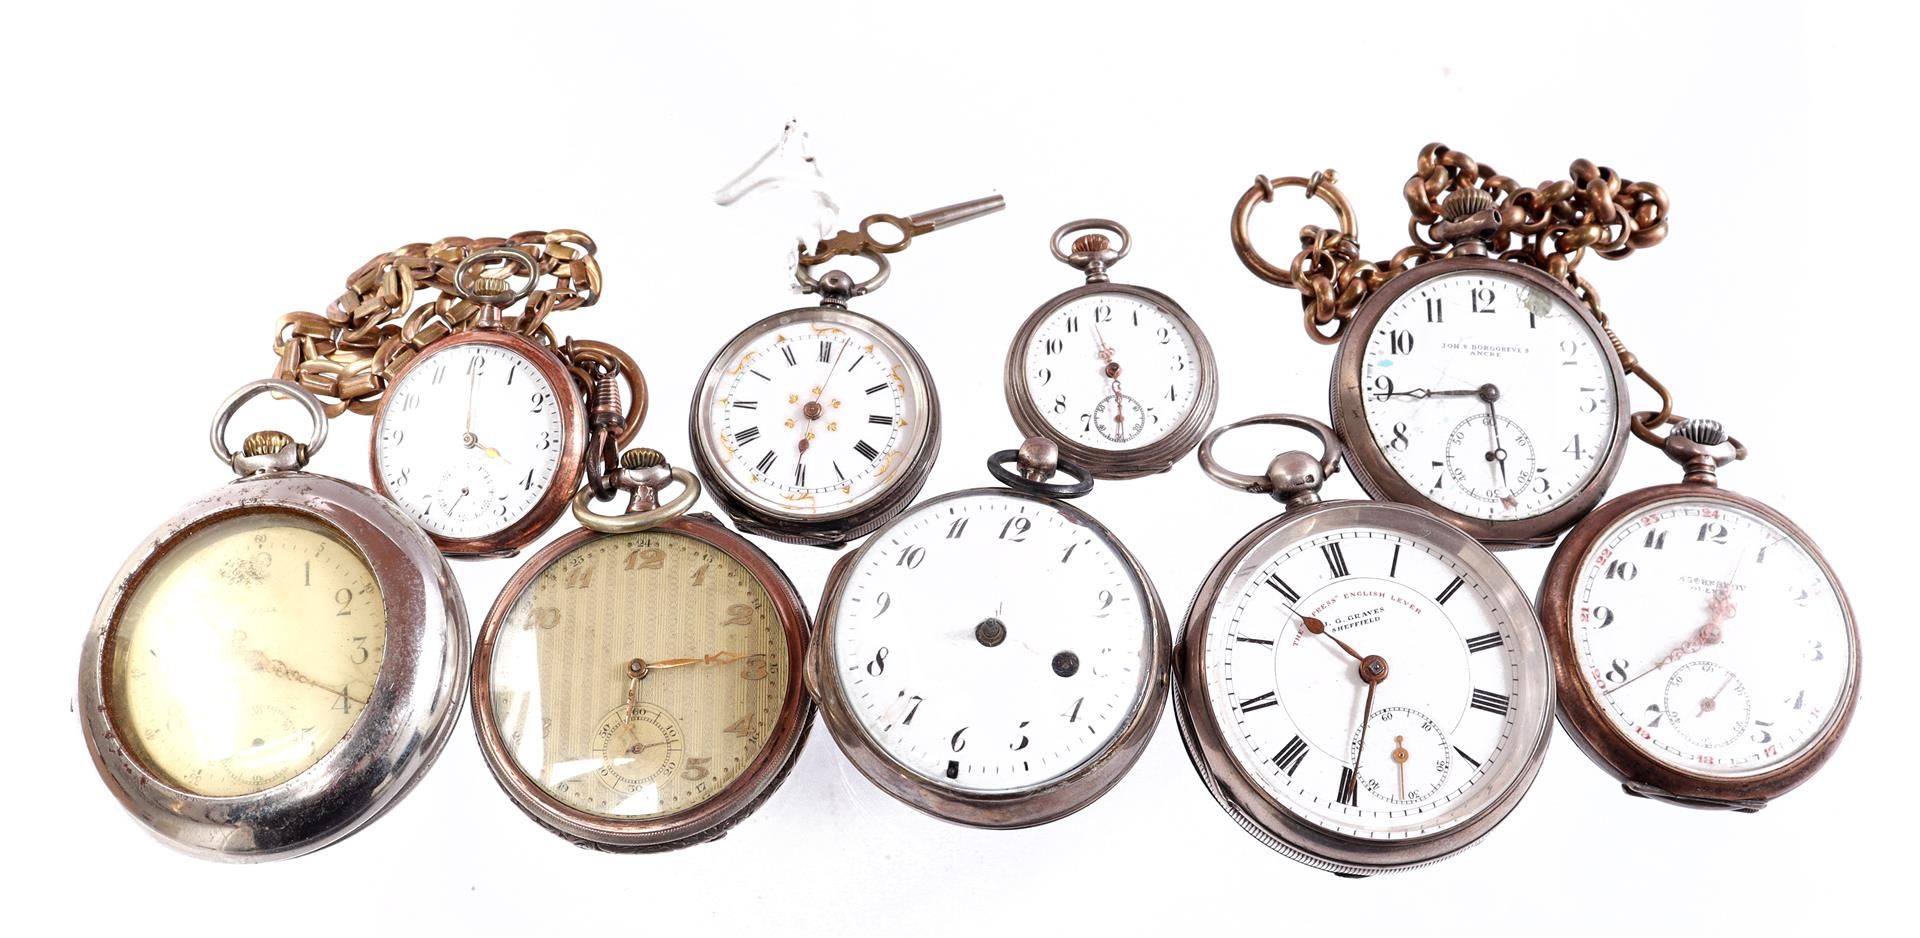 9 pocket watches in silver case of different brands